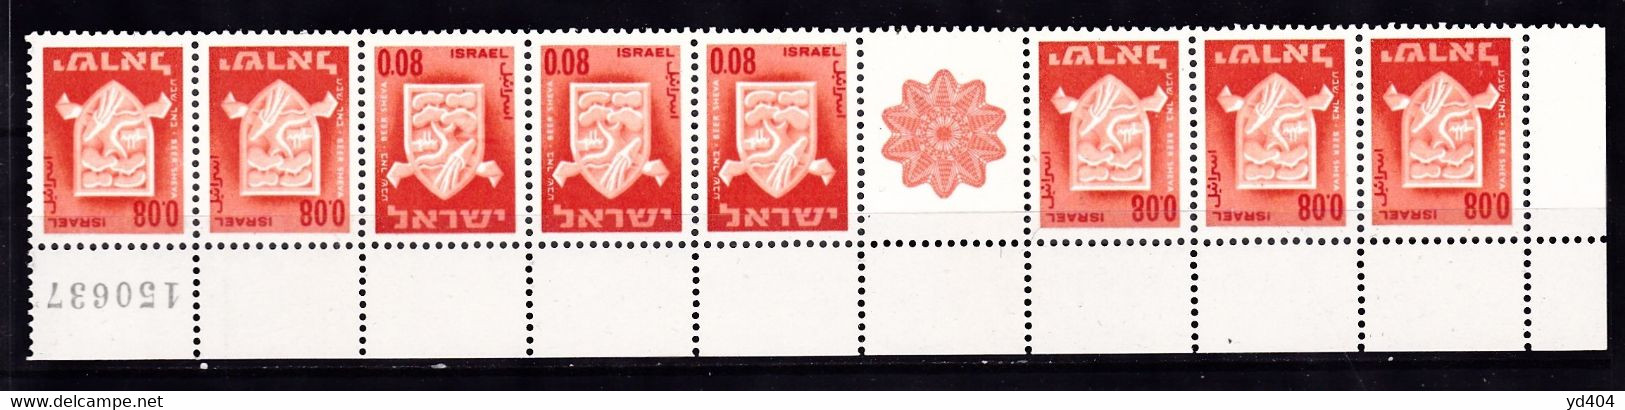 IL57- ISRAEL – 1966 – CURRENT ISSUES FOR BOOKLETS – Y&T # 275a/b MNH - Markenheftchen